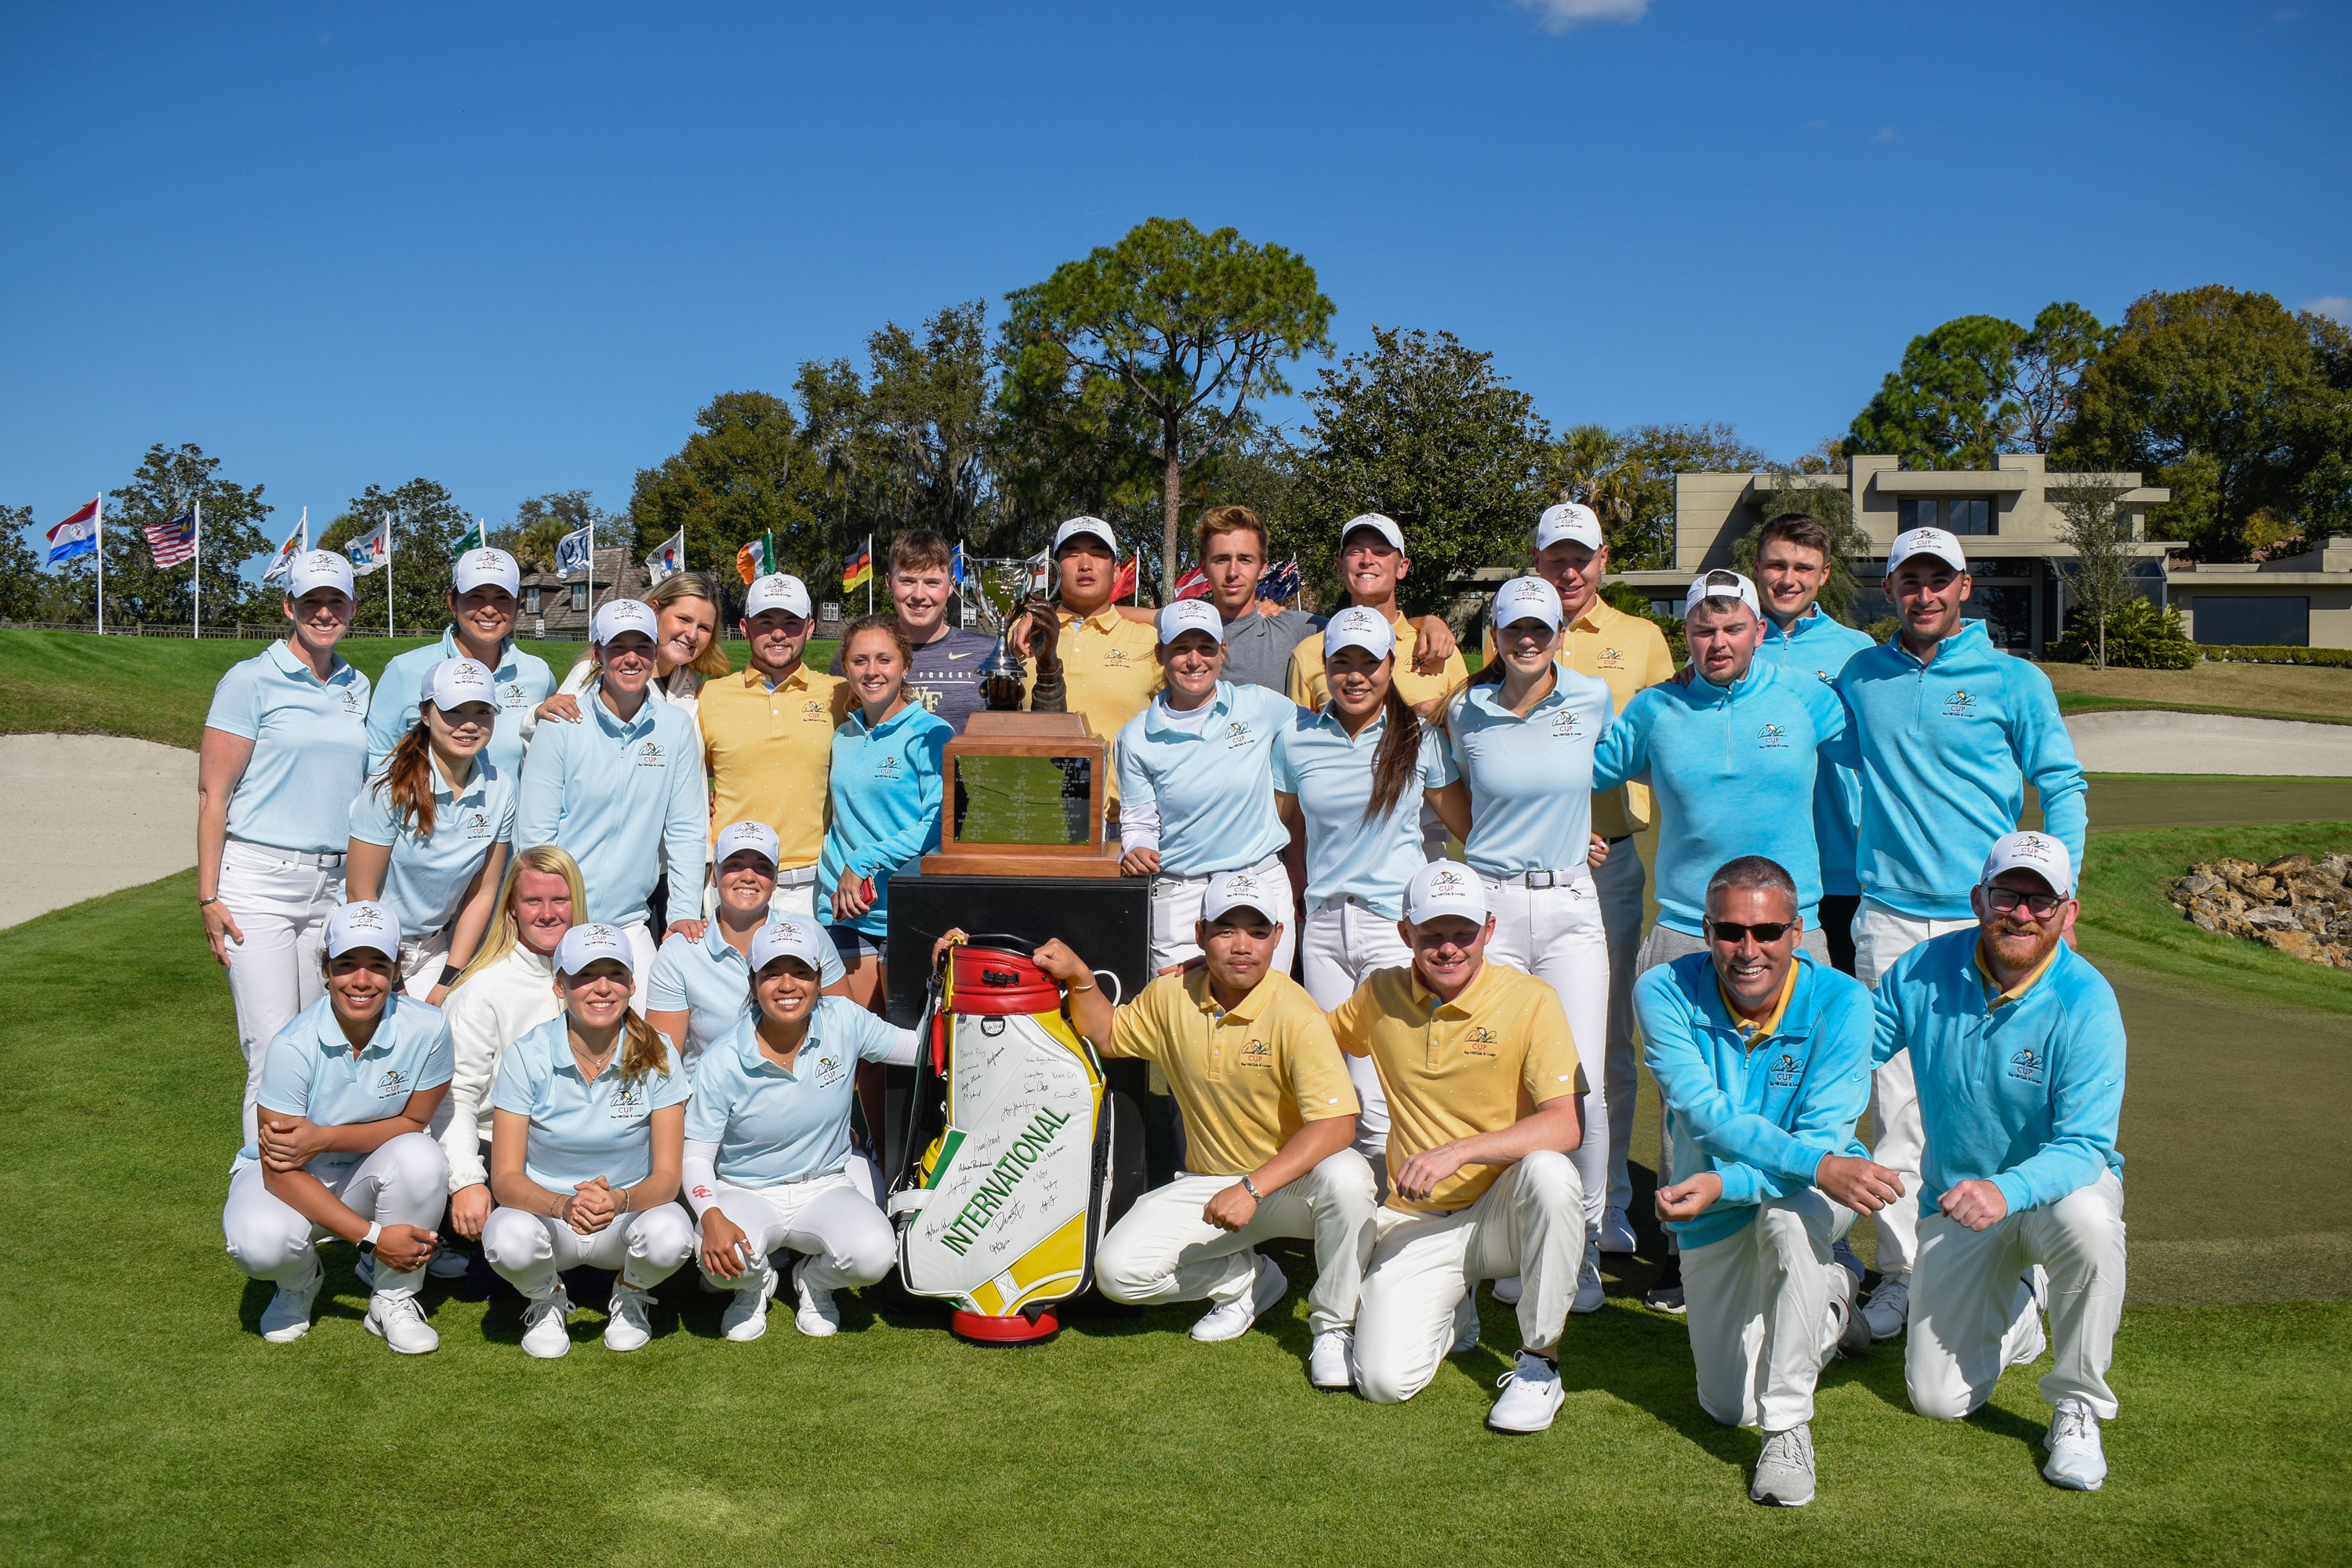 the (lopsided) score, the best part of the Arnold Palmer Cup was